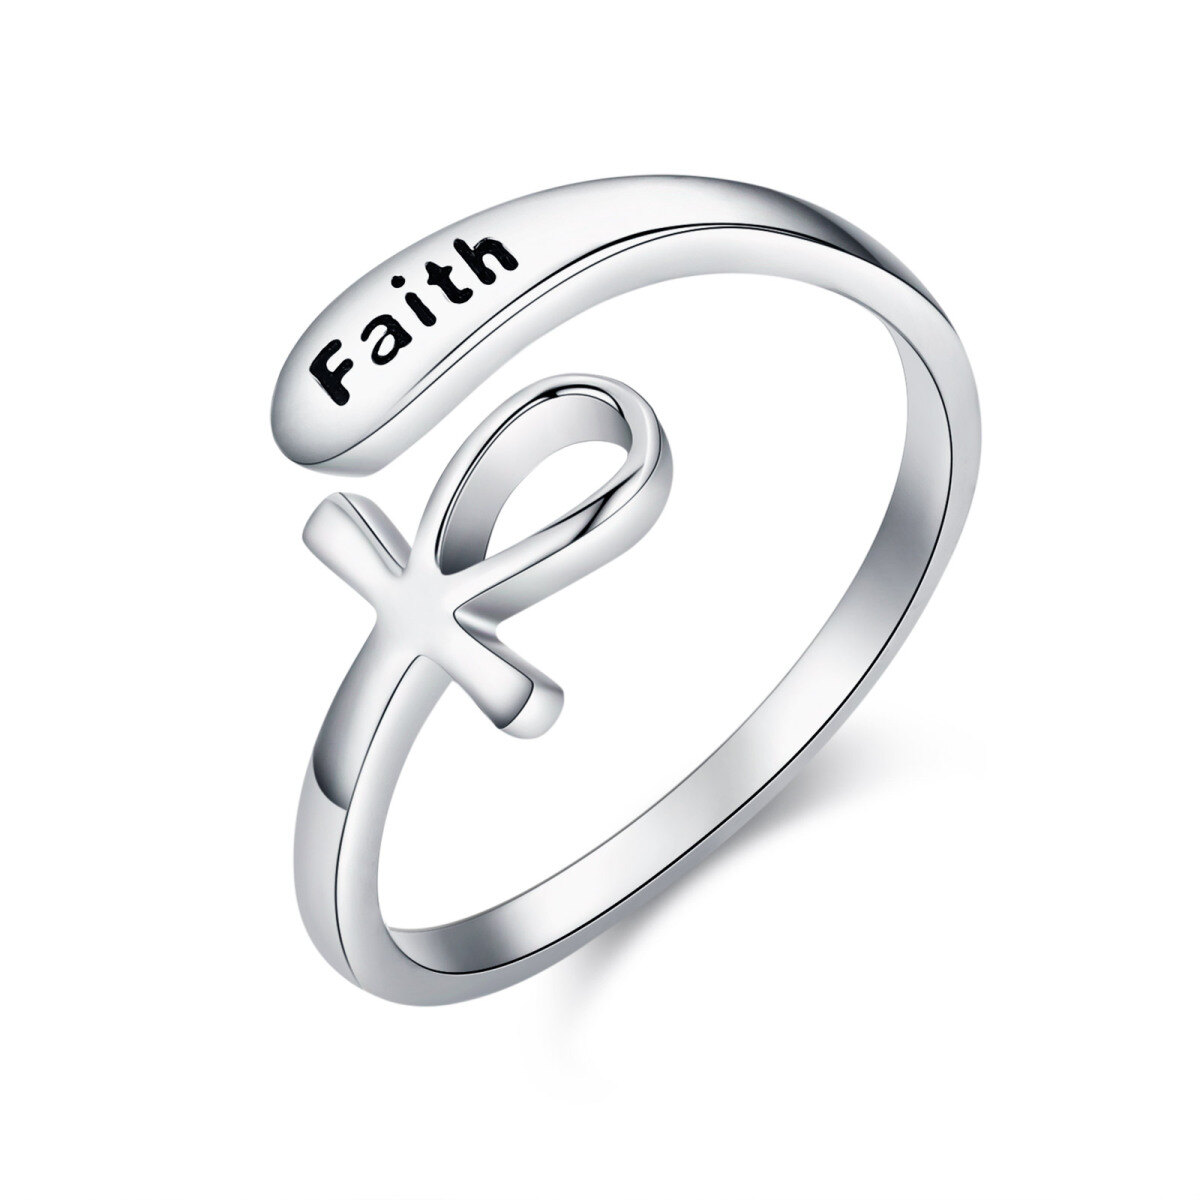 Sterling Silver Ankh Open Ring with Engraved Word-1